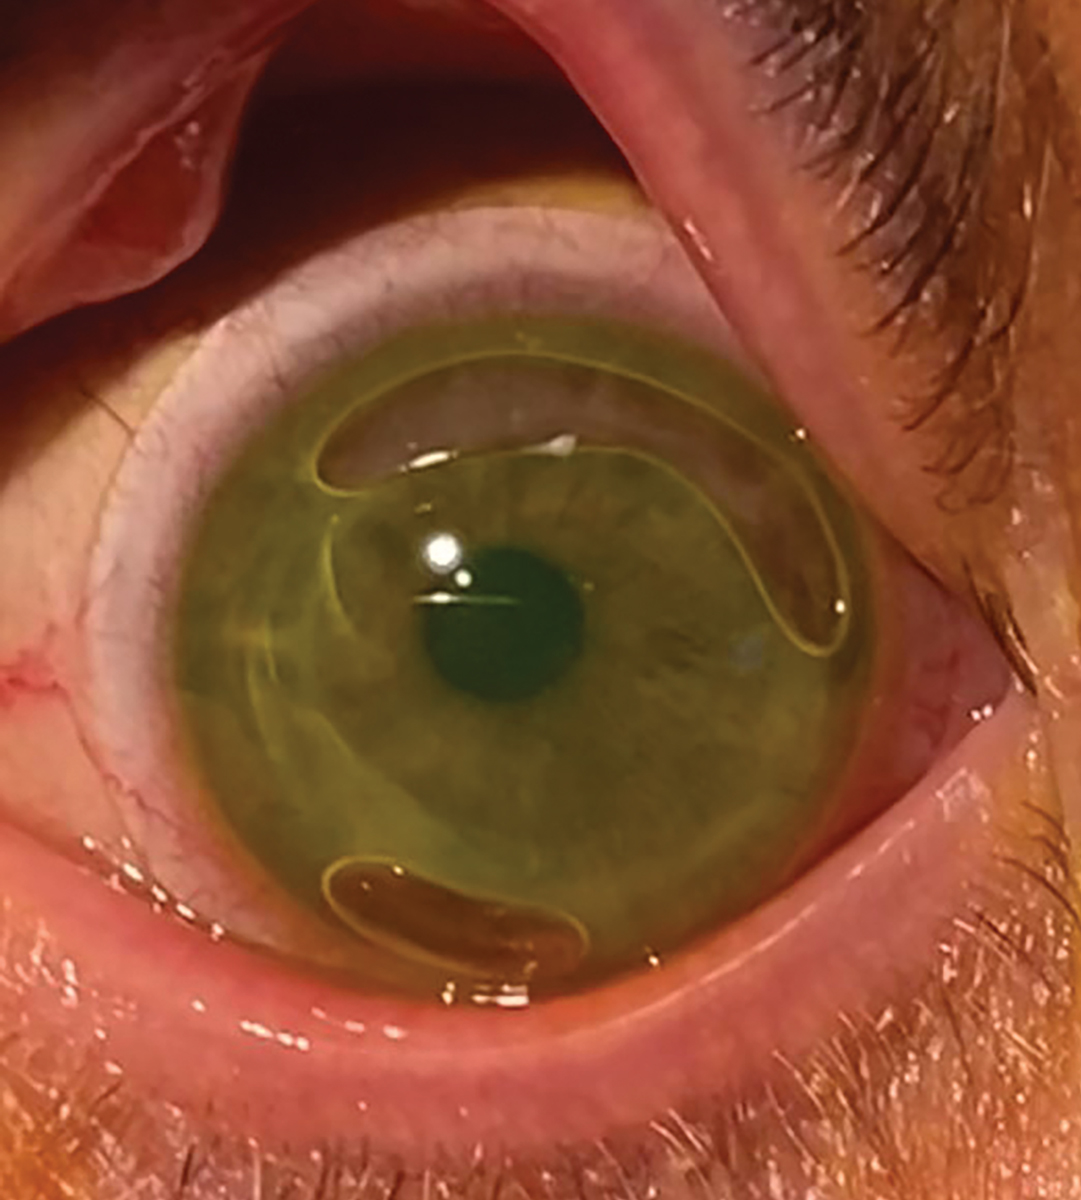 Scleral lens application can be a challenge for some patients, leading to bubbles and eye irritation if the patient isn’t aware of their presence. 